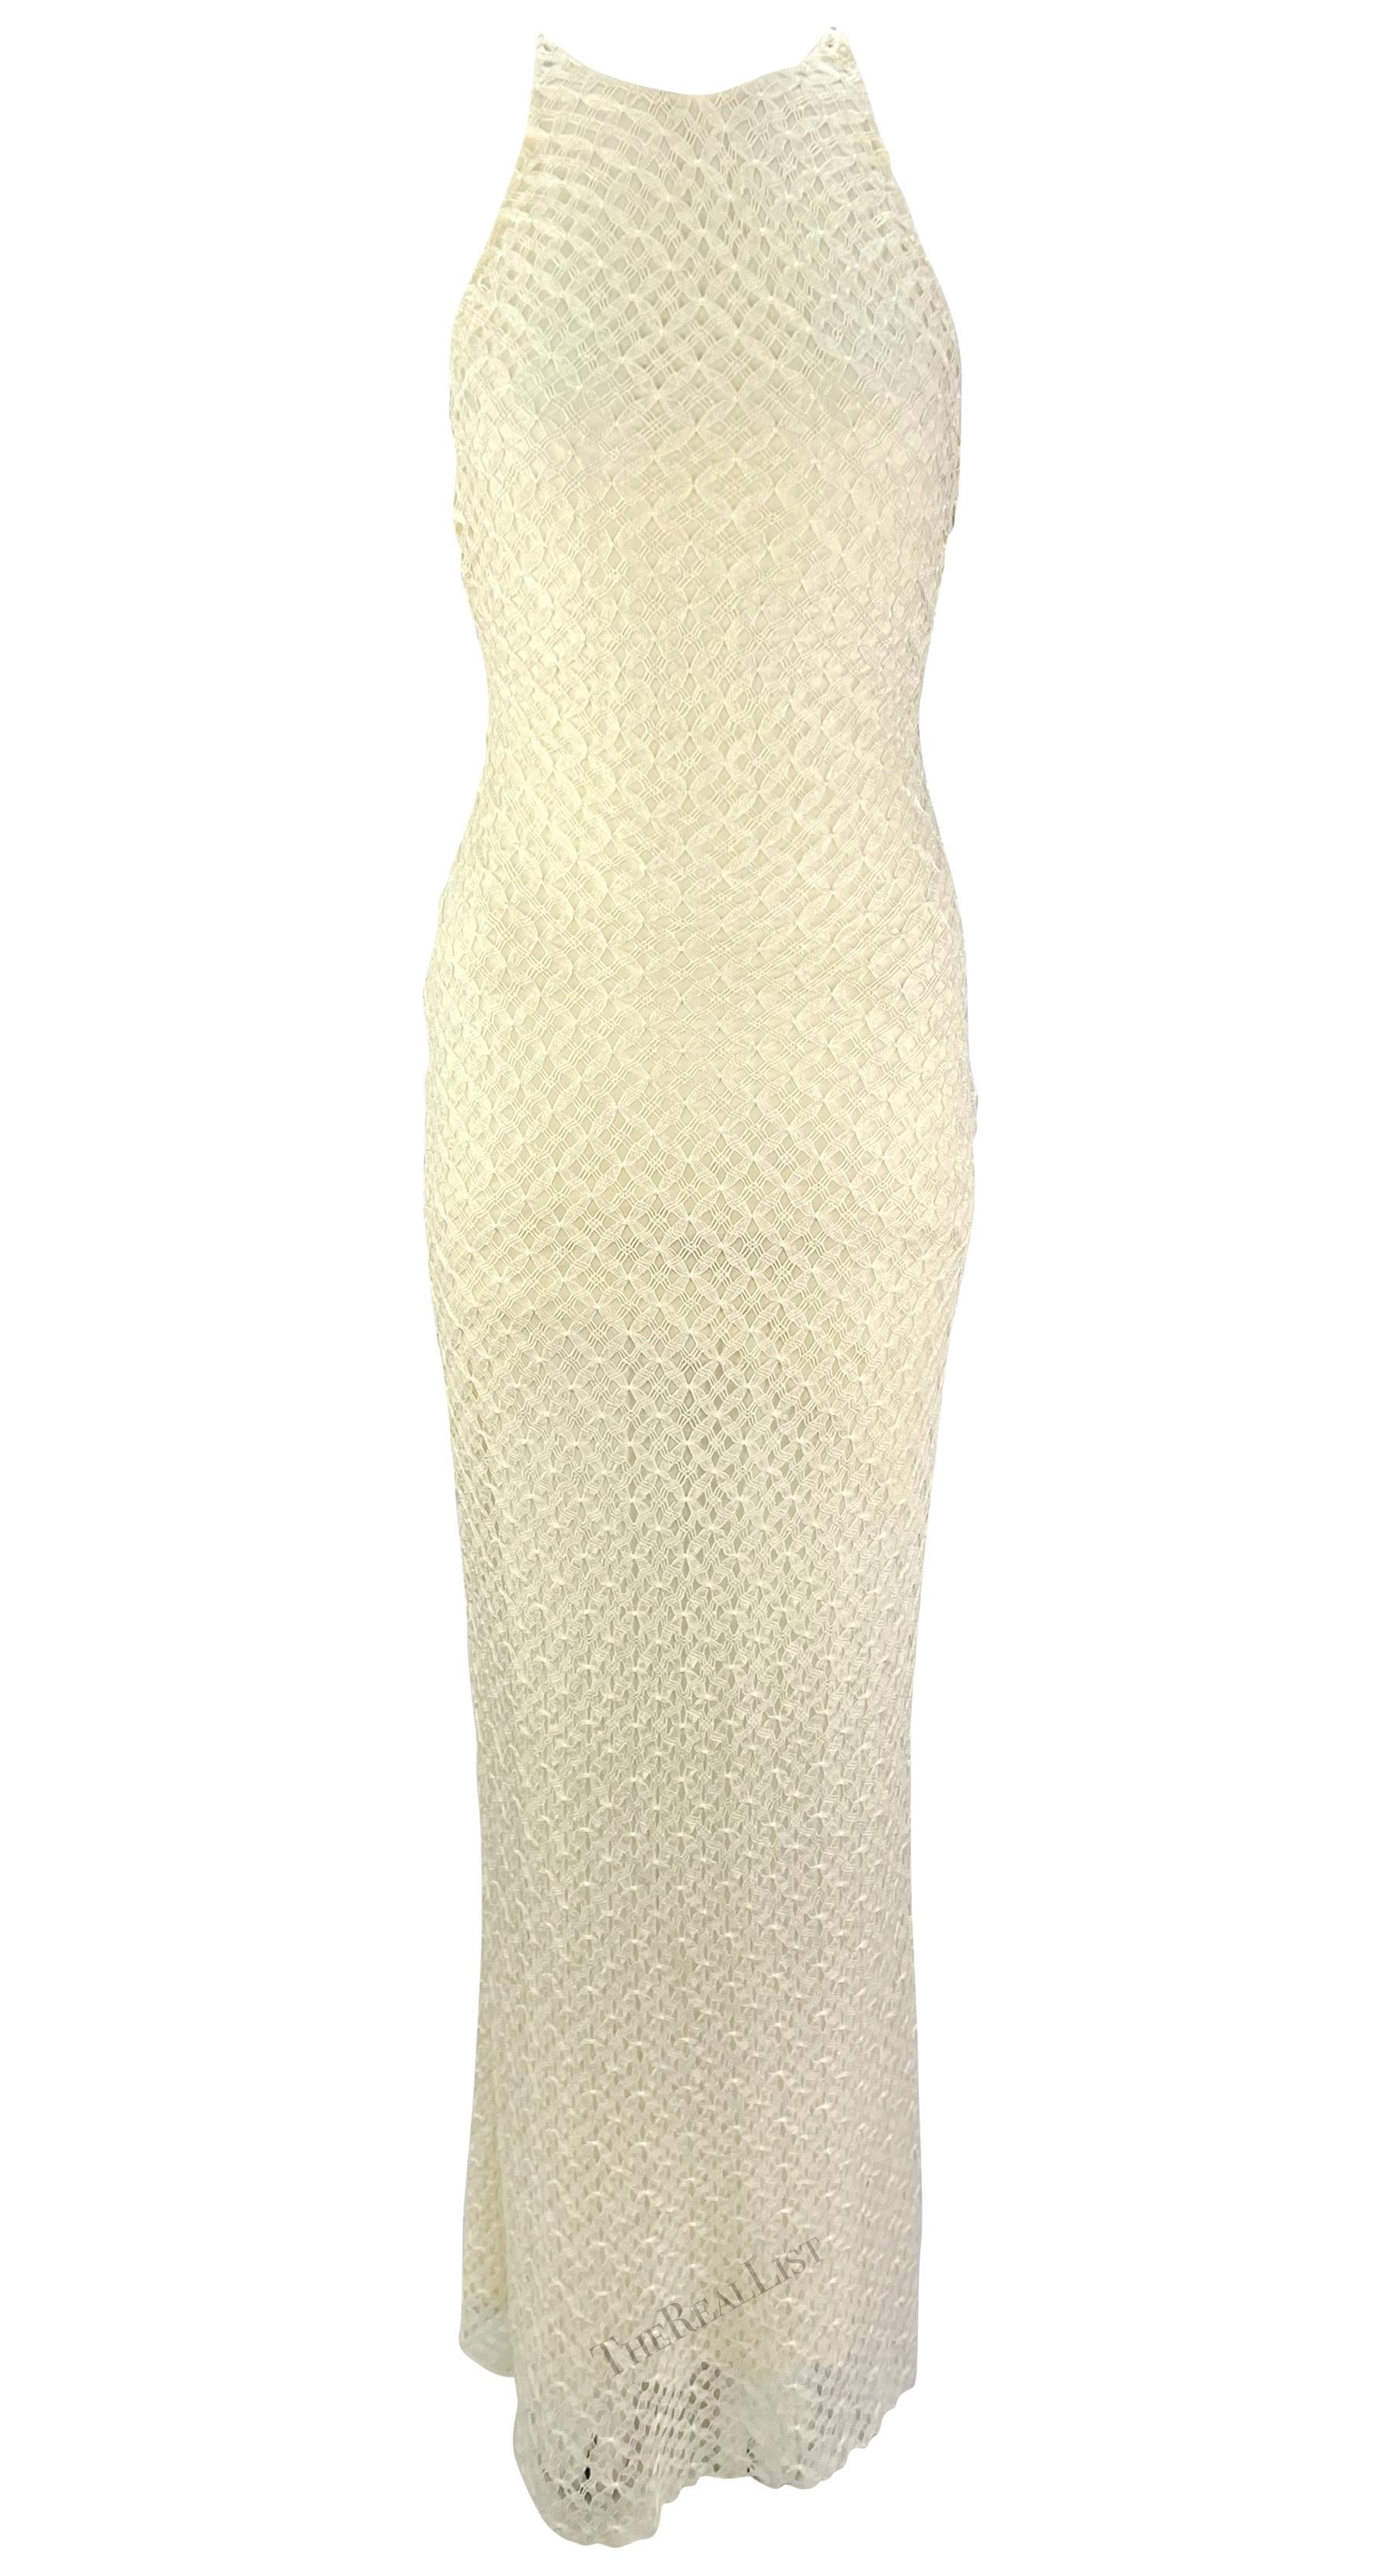 S/S 2002 Gianni Versace by Donatella Off-White Lace Backless Rhinestone Gown  3